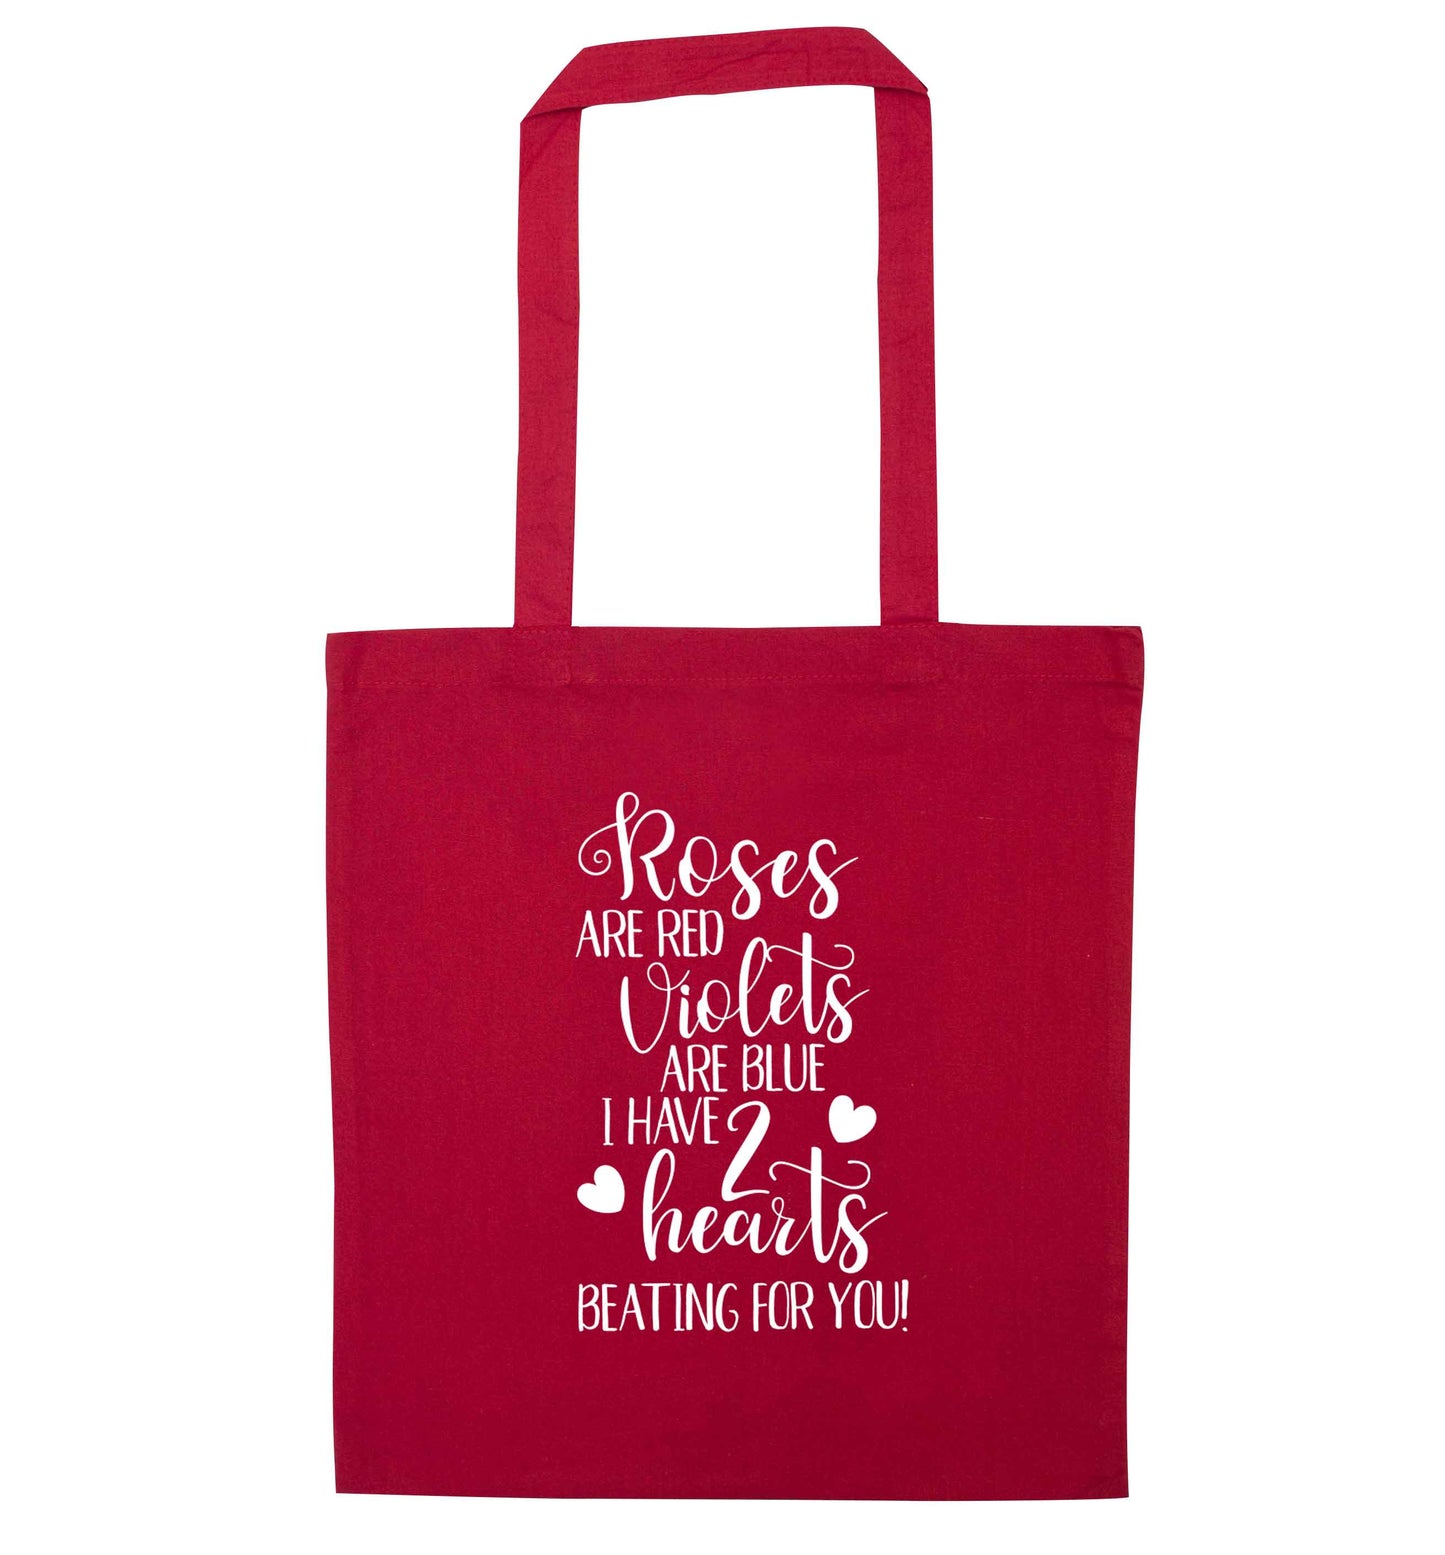 Roses are red violets are blue I have two hearts beating for you red tote bag